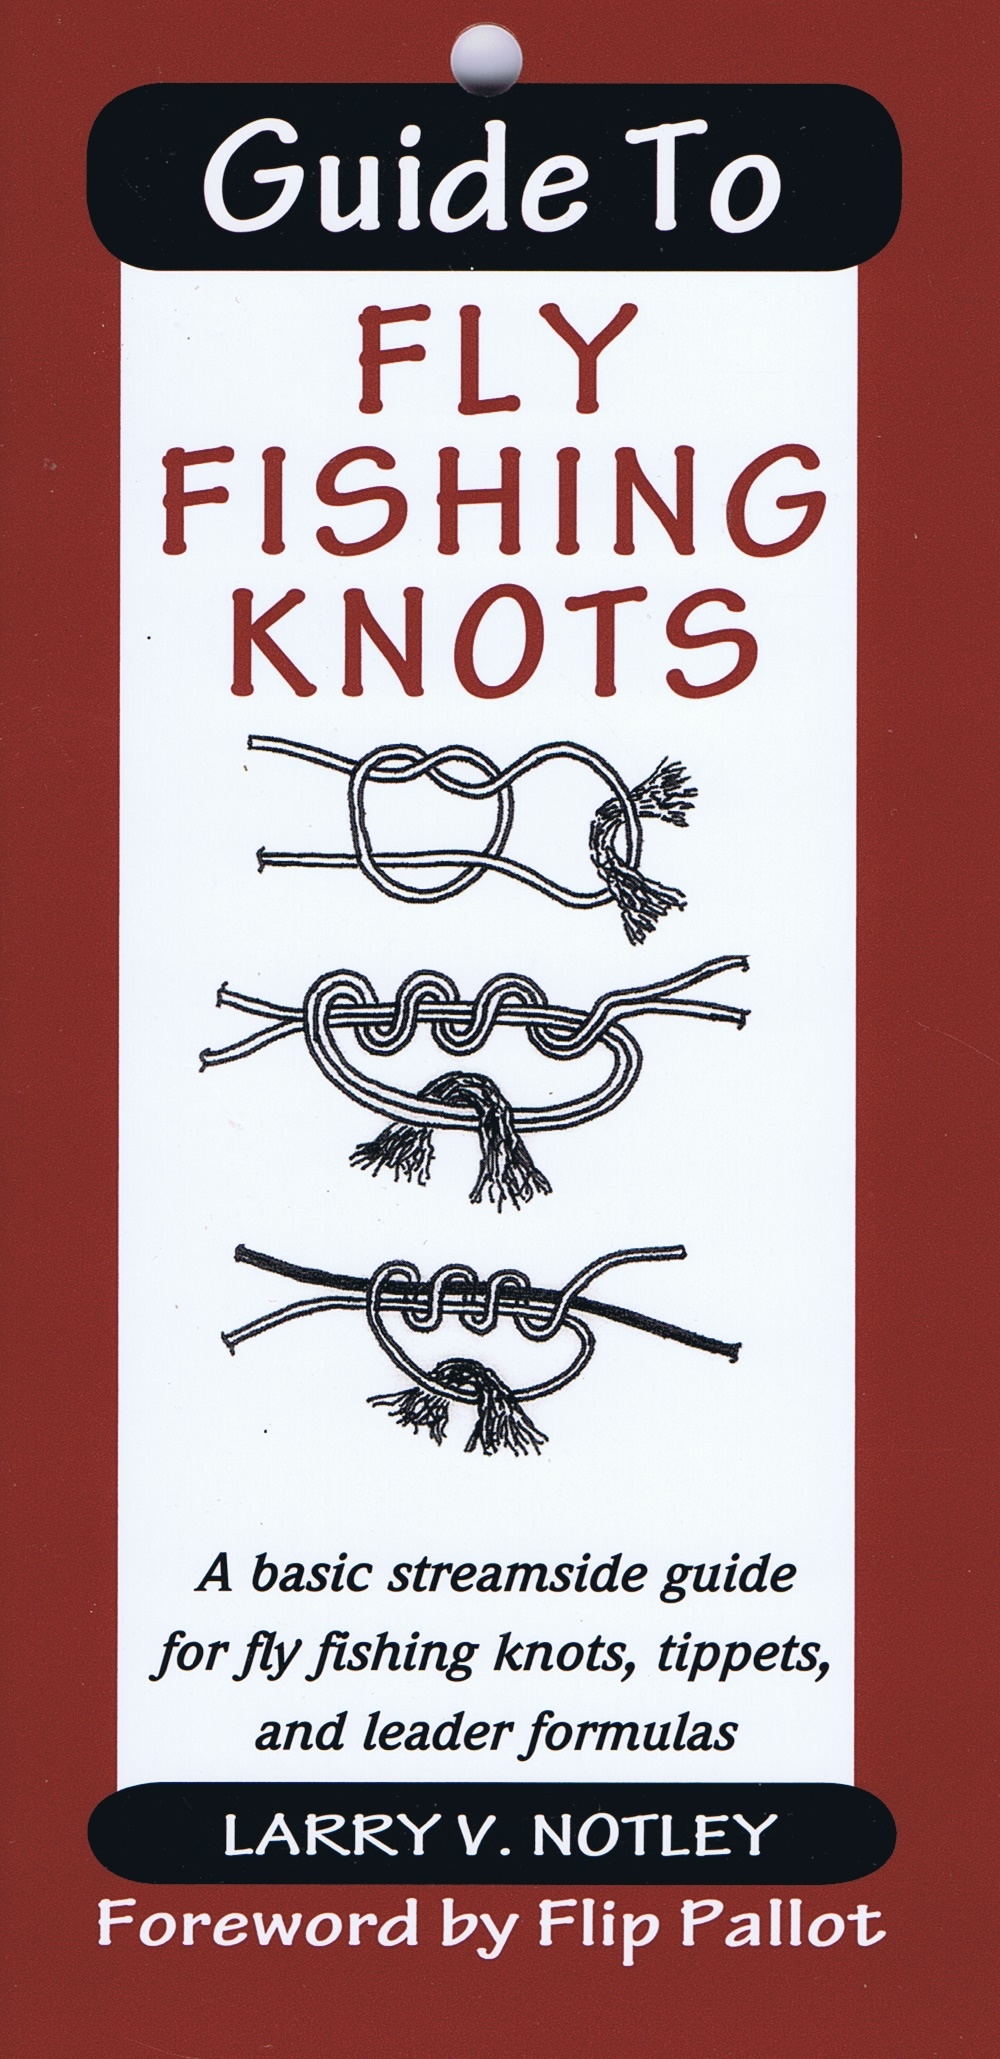 Guide to Fly Fishing Knots by Larry V. Notley